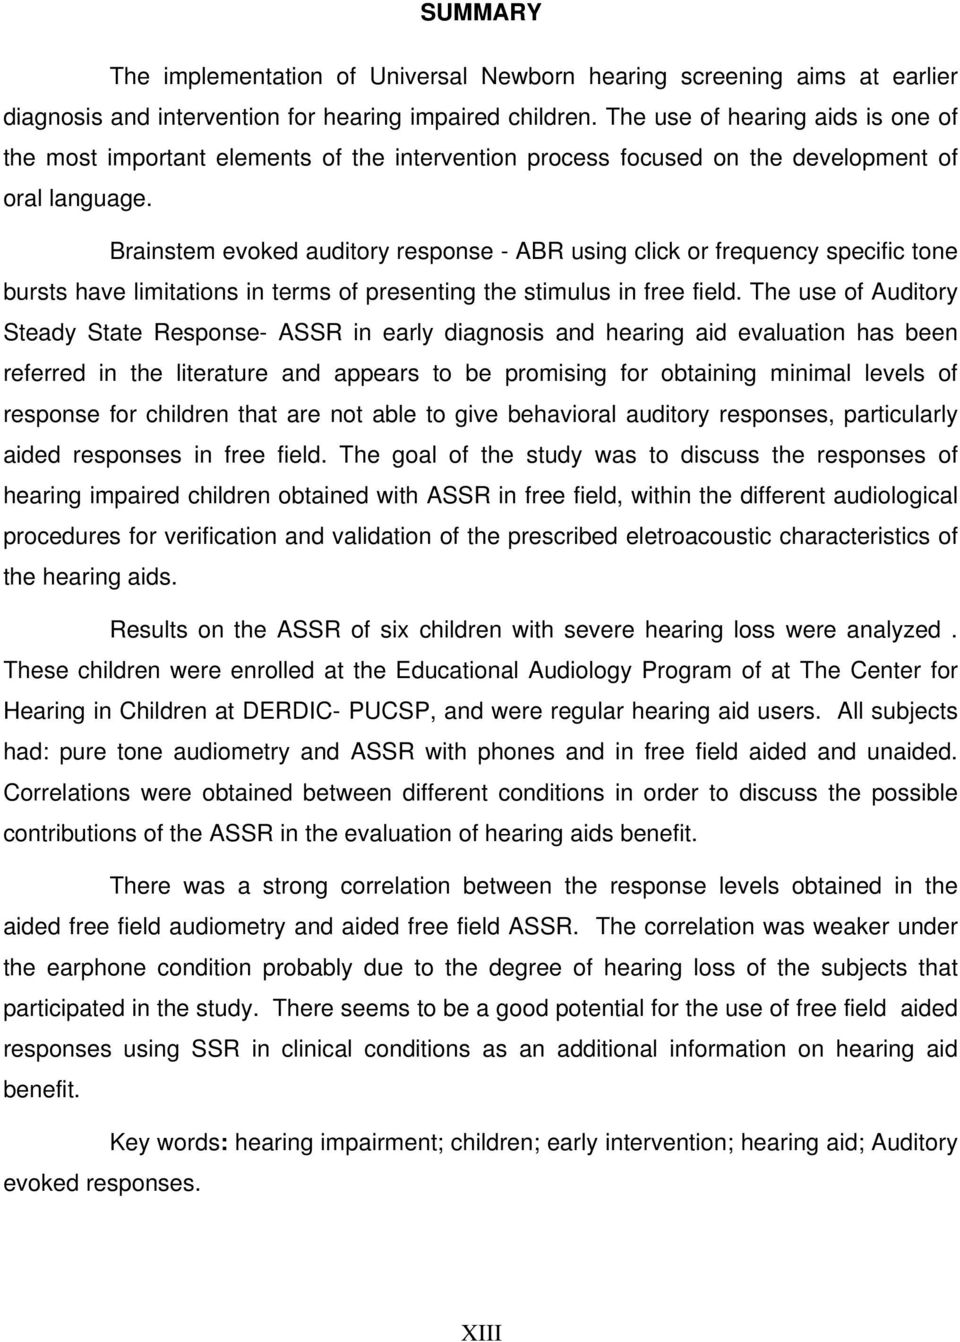 Brainstem evoked auditory response - ABR using click or frequency specific tone bursts have limitations in terms of presenting the stimulus in free field.